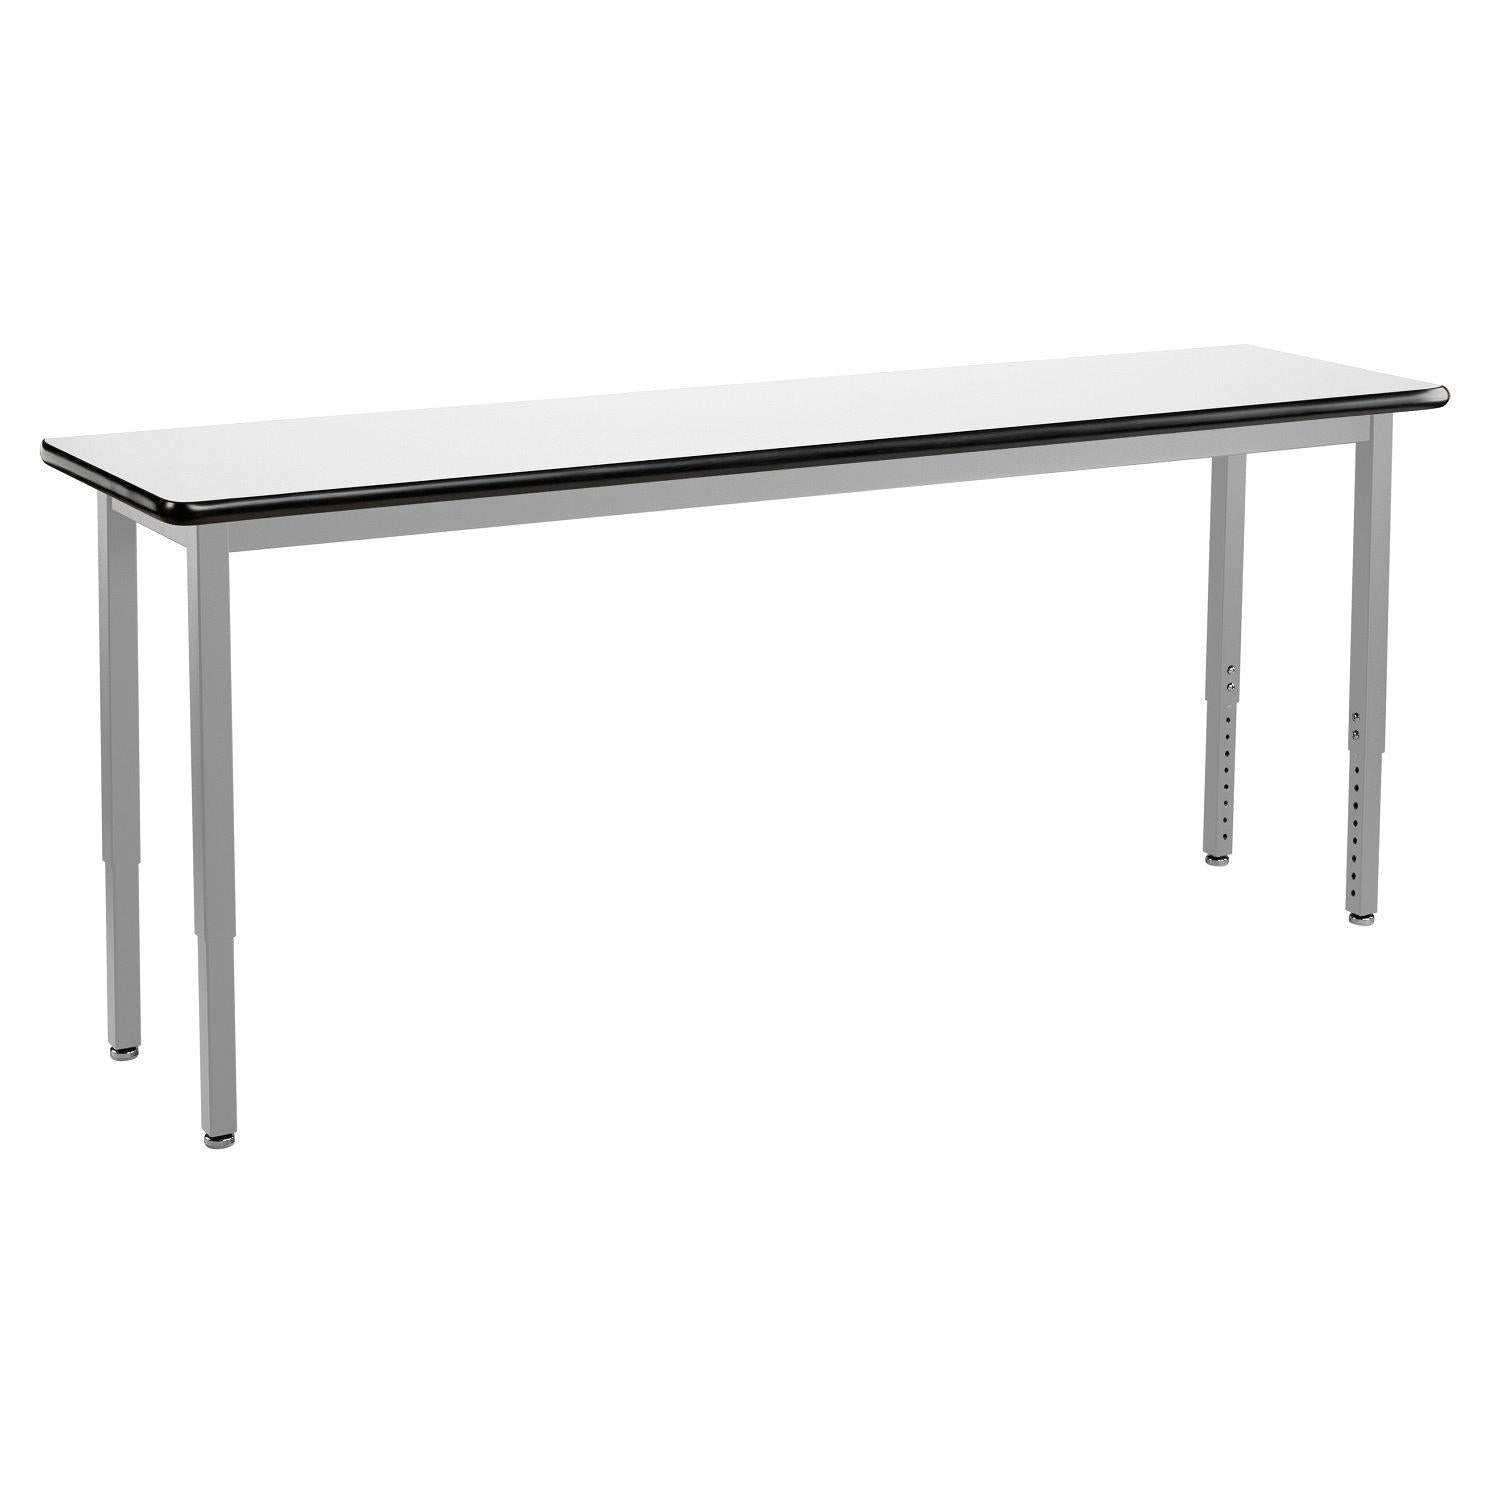 Heavy-Duty Height-Adjustable Utility Table, Soft Grey Frame, 18" x 96", Whiteboard High-Pressure Laminate Top